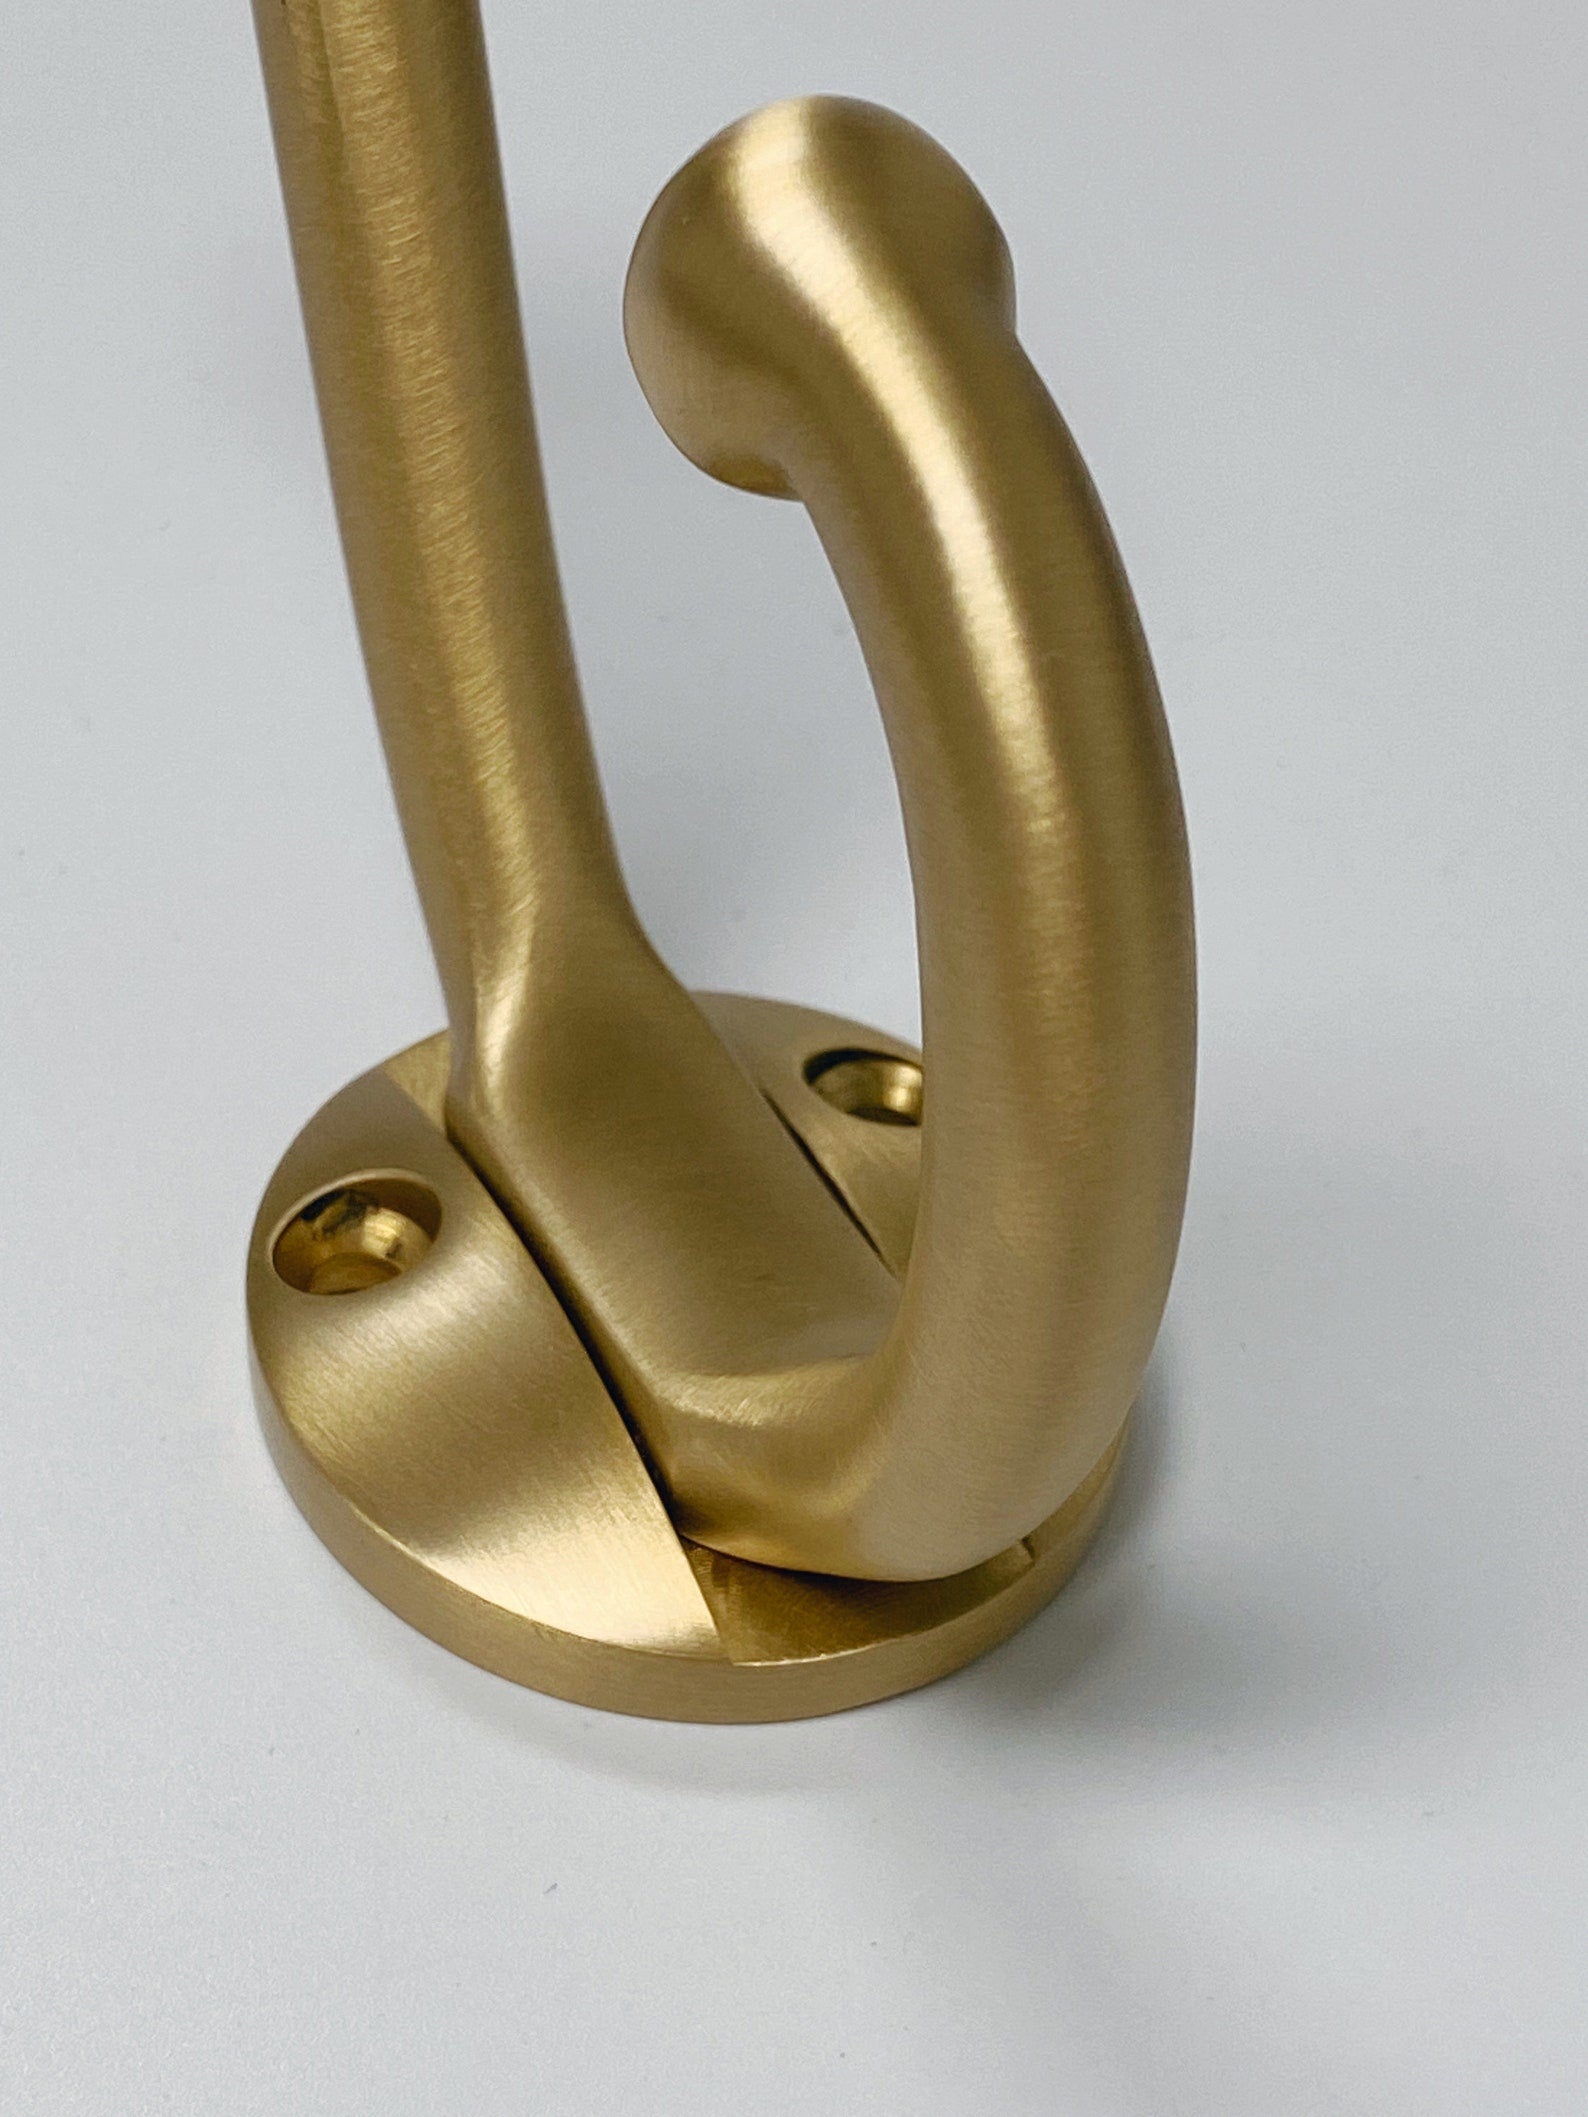 Polished Unlacquered Brass Heritage Wall Hook, Brass Wall Coat Hook